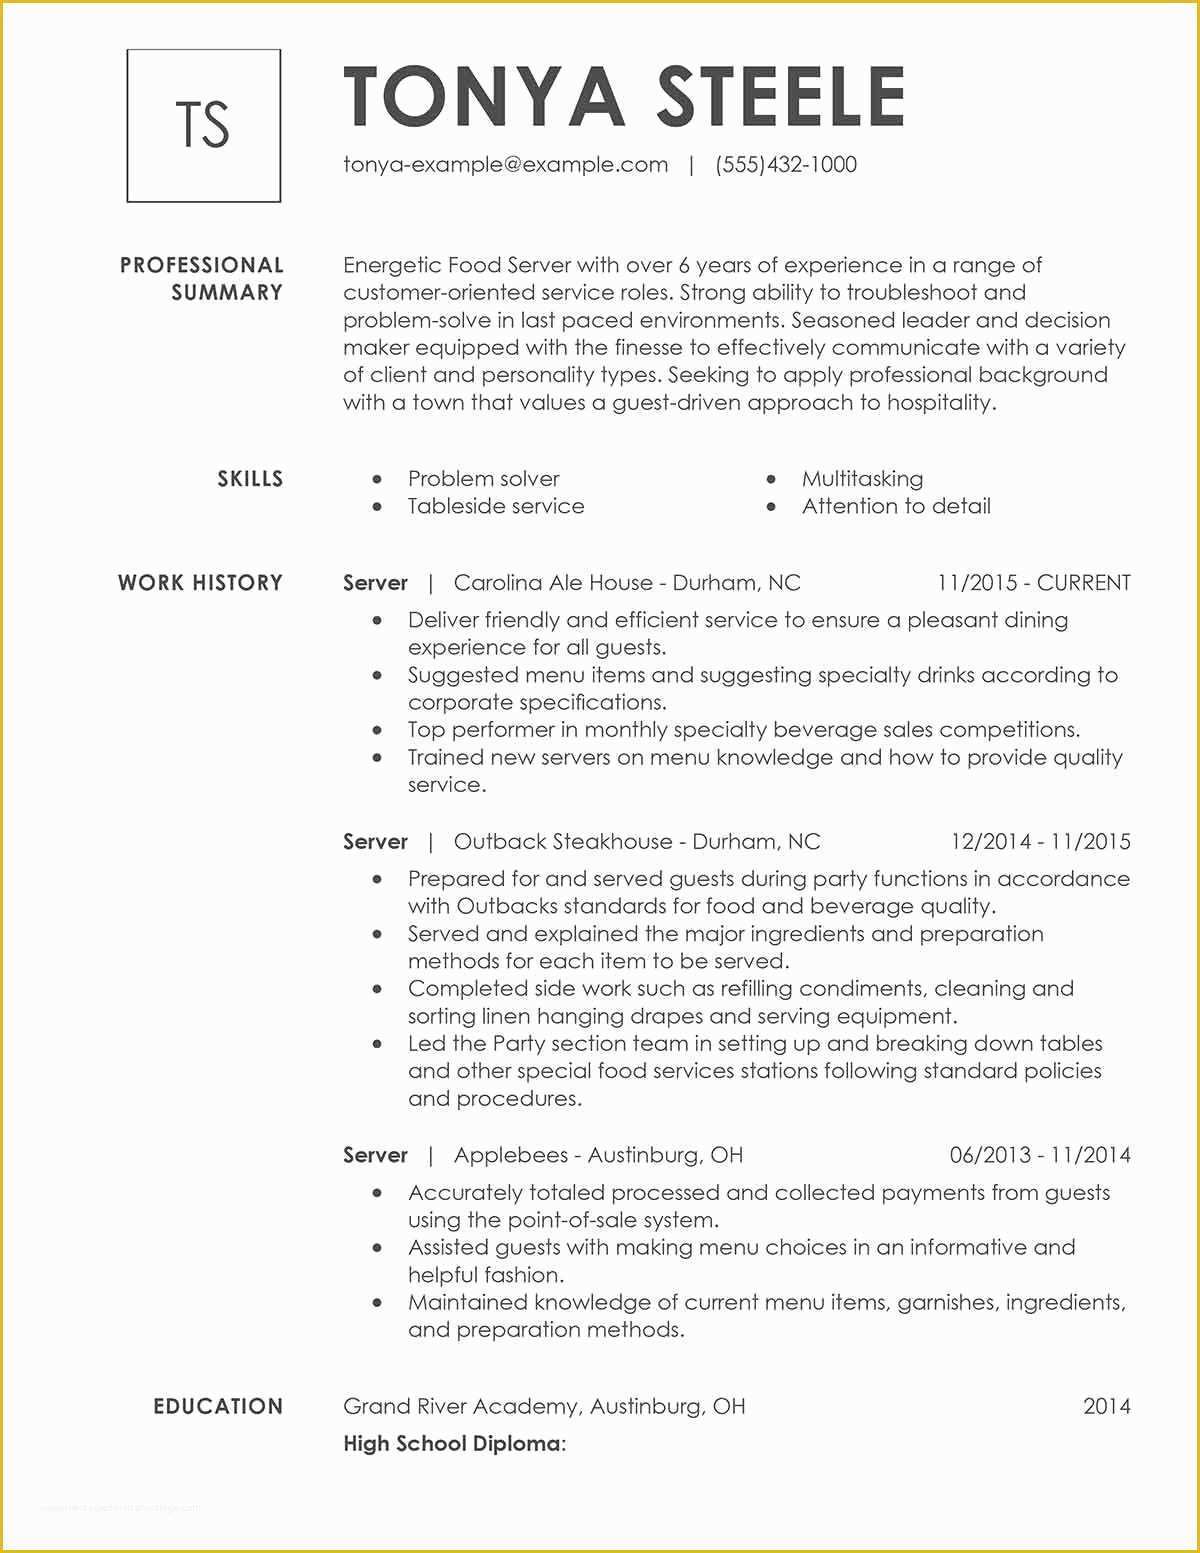 Free Resume Templates for Restaurant Servers Of Unfor Table Restaurant Server Resume Examples to Stand